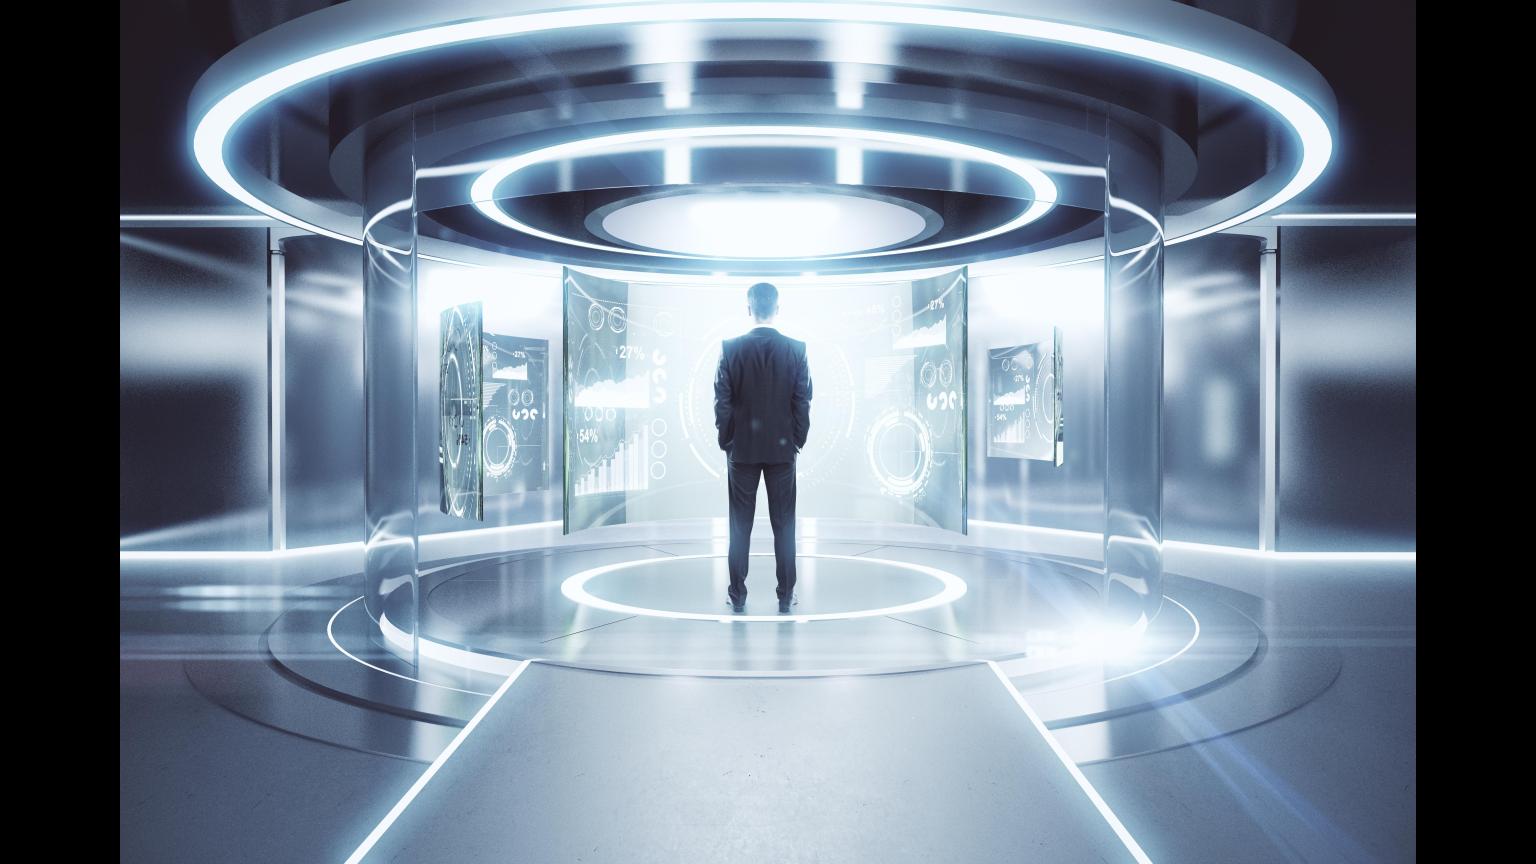 Beam me up? The paradoxes and potential of human teleportation - Big Think